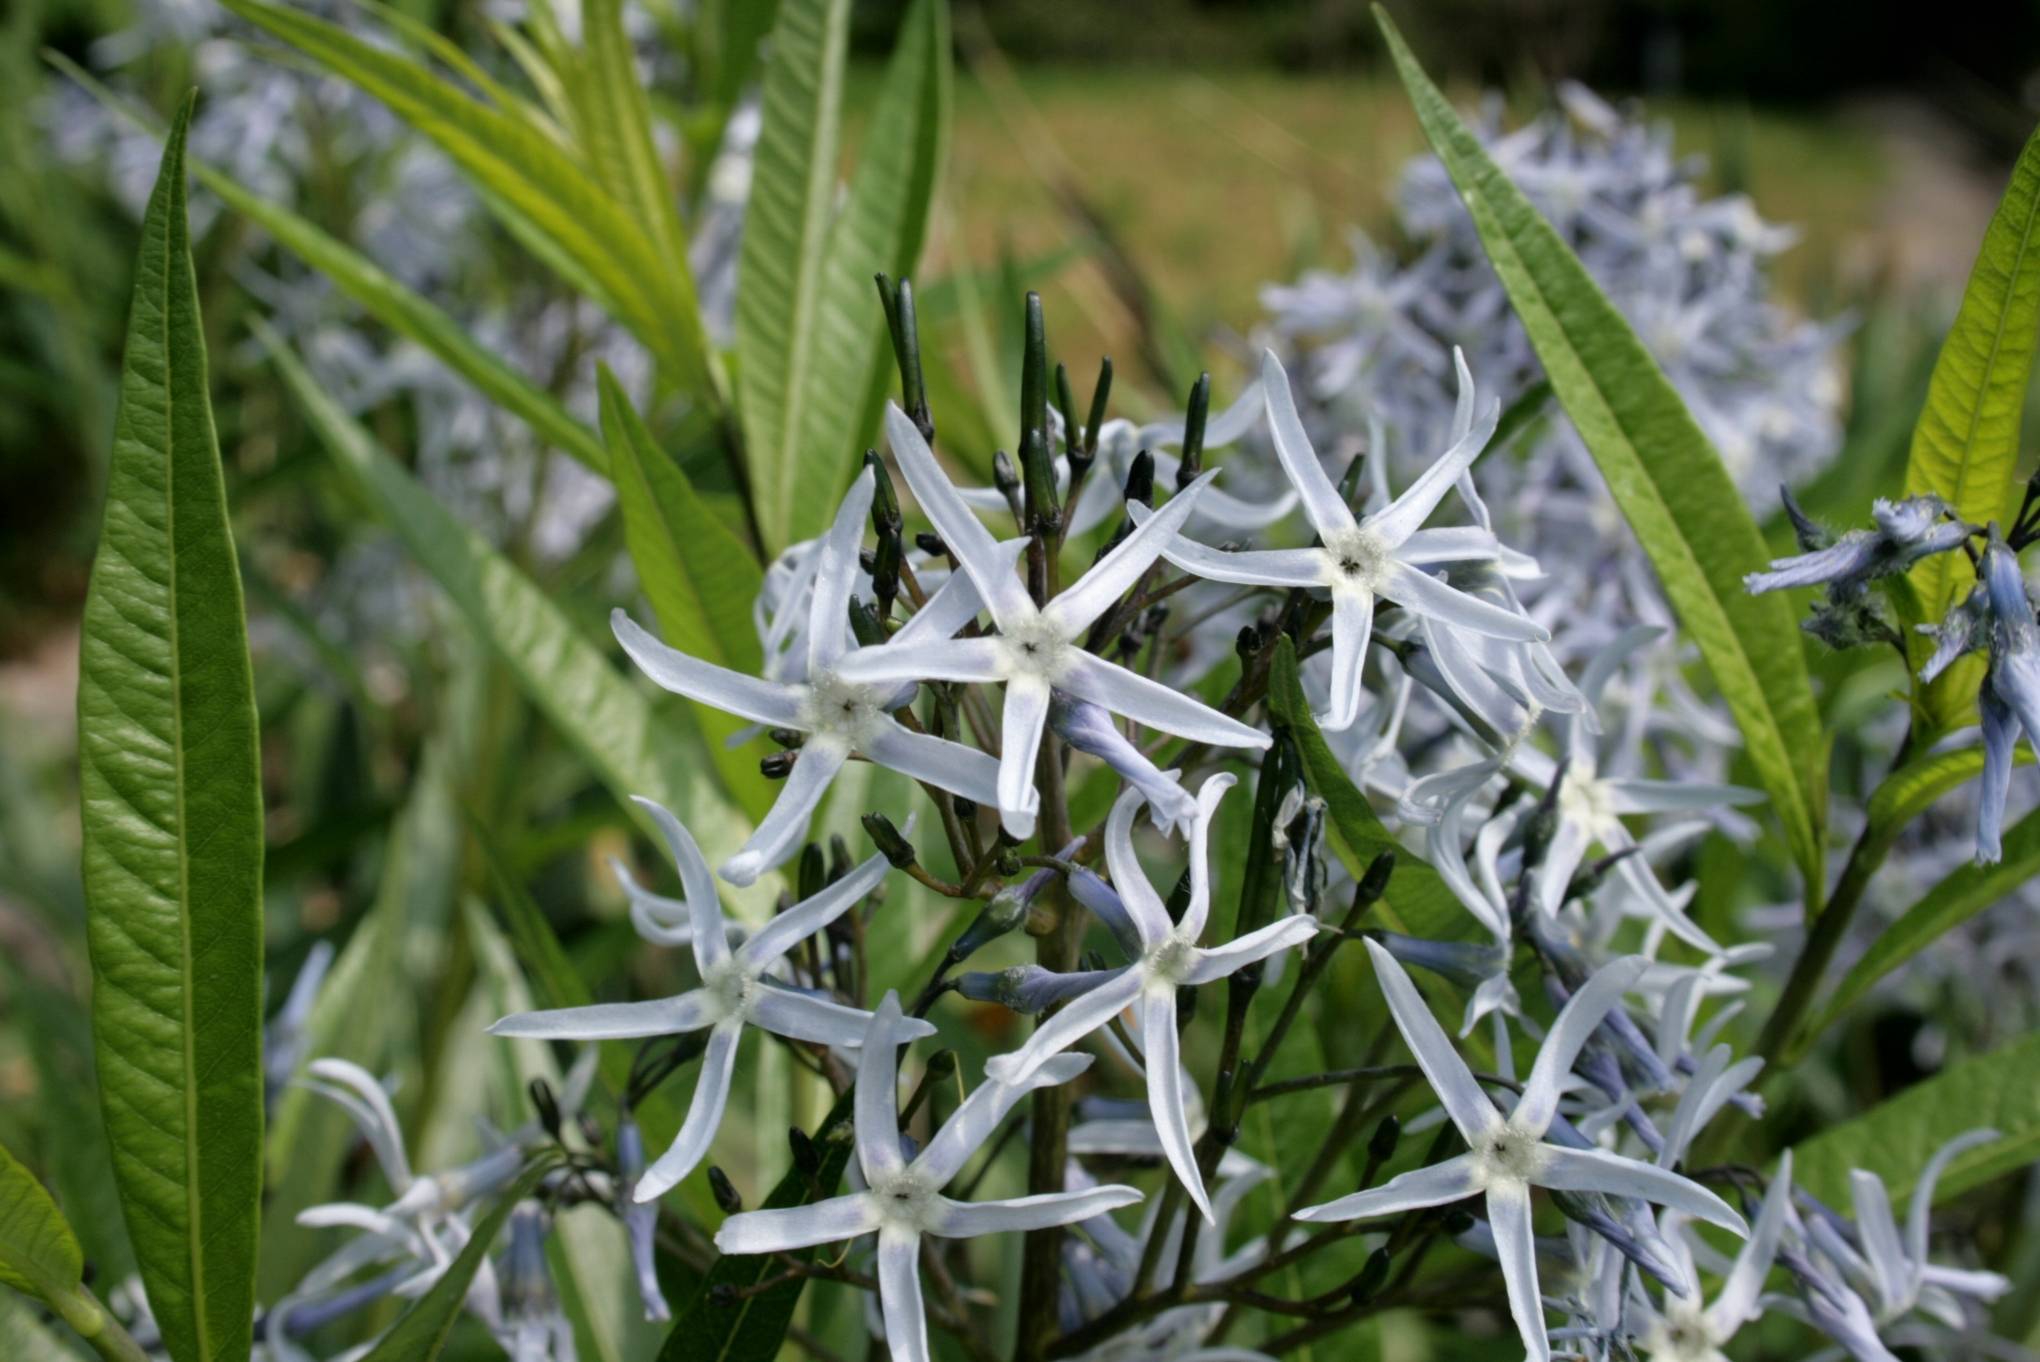 light-blue flowers with black buds, lime-green leaves and dark-brown stems